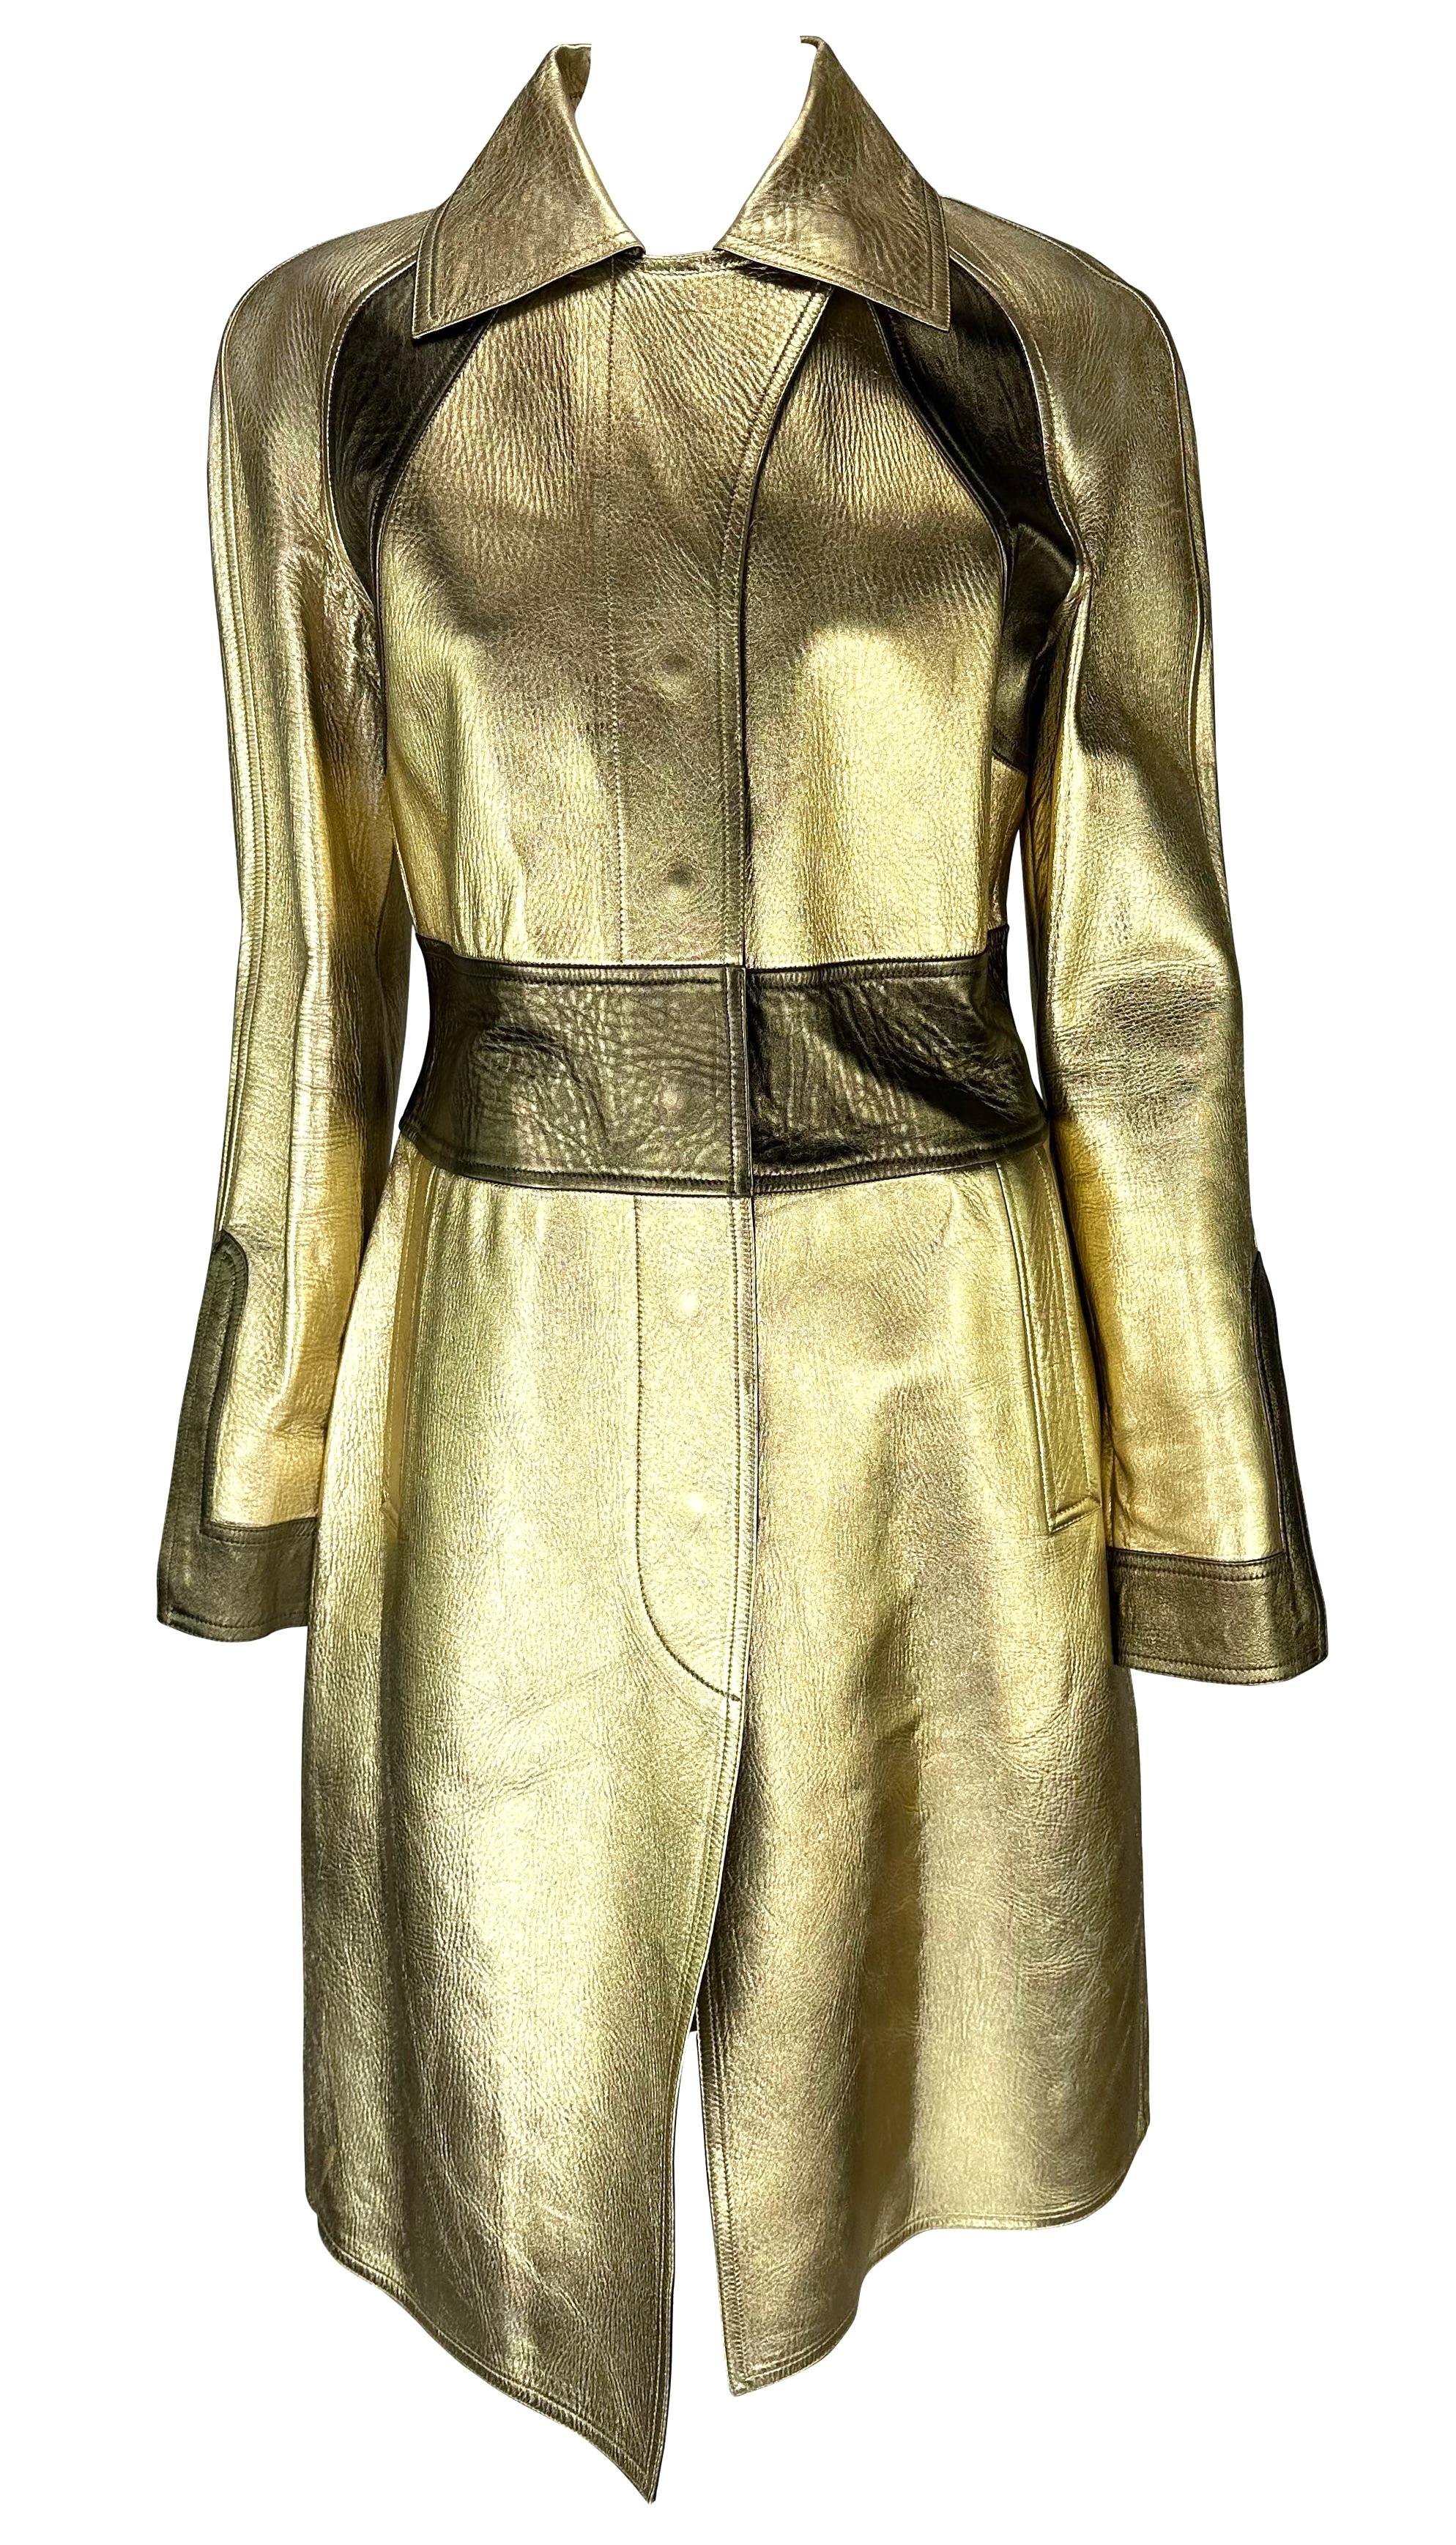 F/W 2000 Gucci by Tom Ford Runway Ad Two-Tone Gold Metallic Leather Coat 2